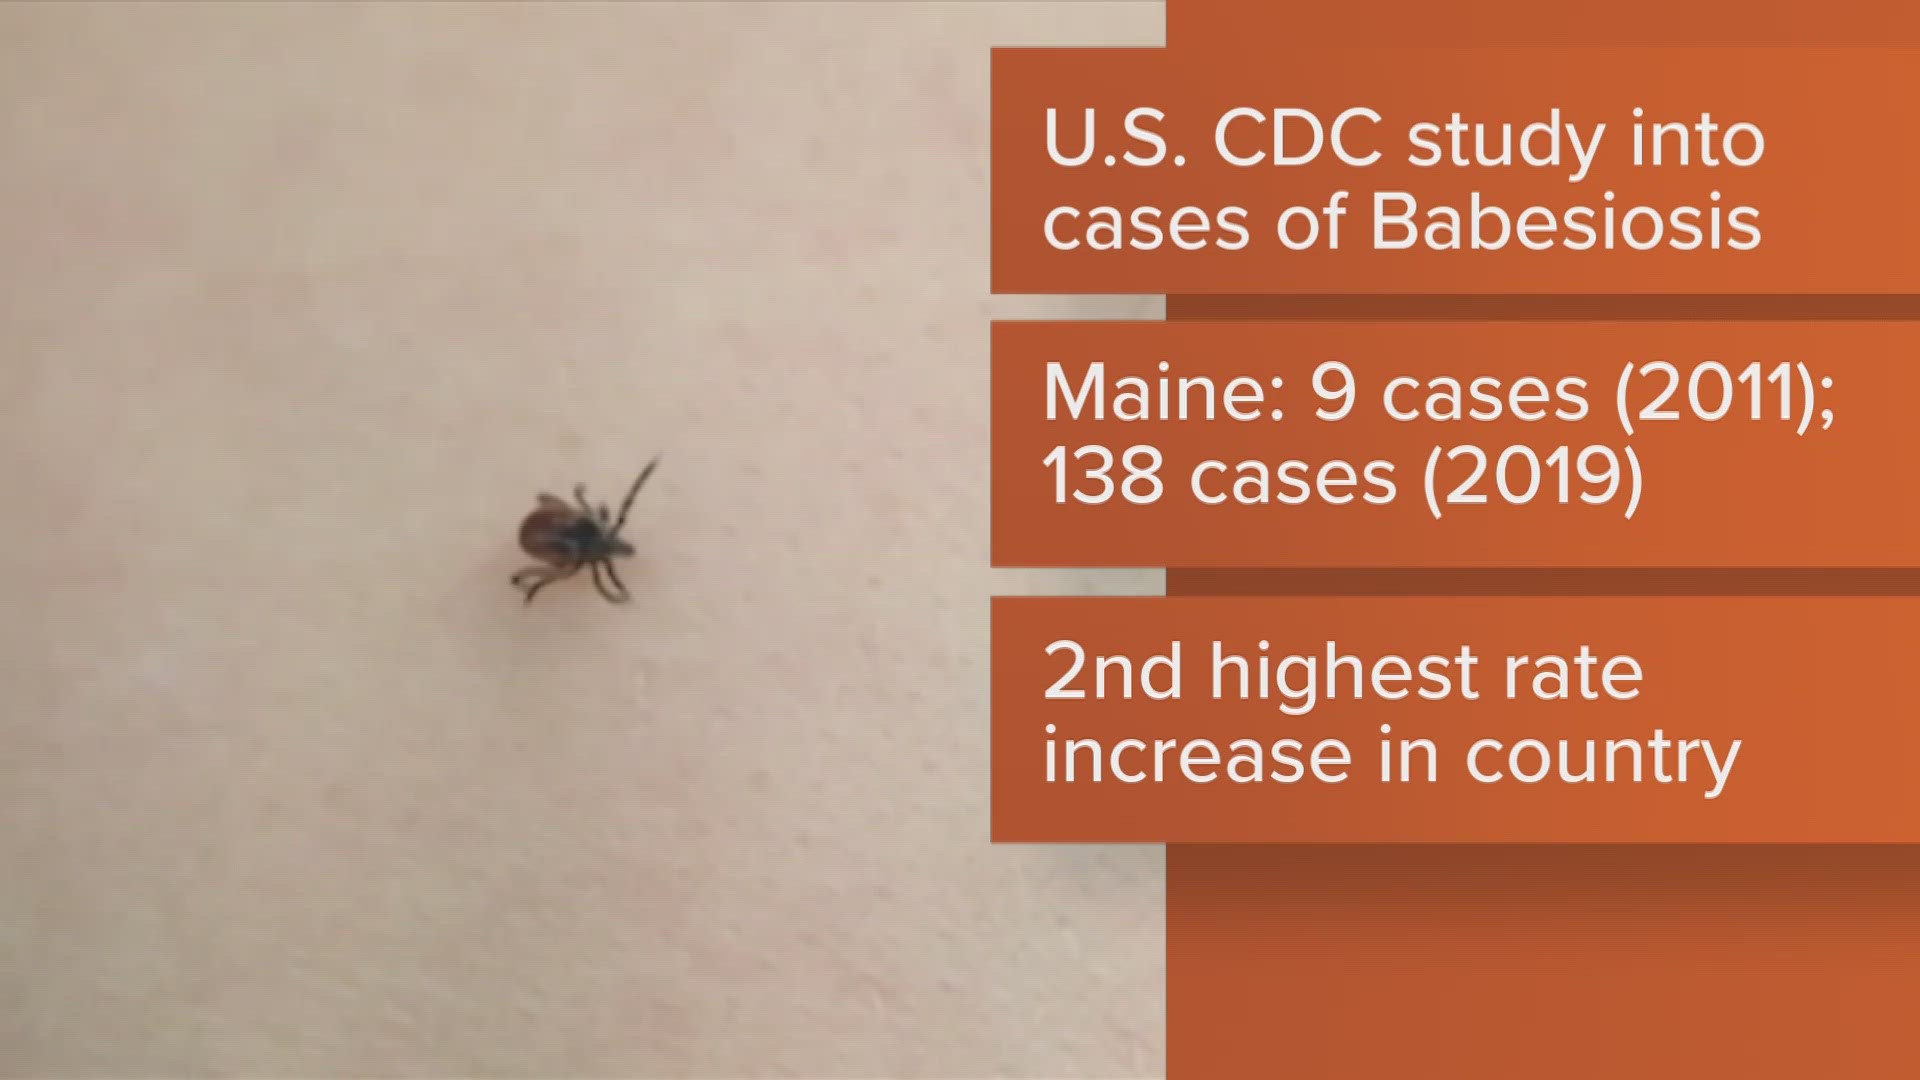 A new study by the U.S. CDC found the rate of tick-borne parasitic disease Babesiosis has jumped higher in Maine than in all other states but Vermont.